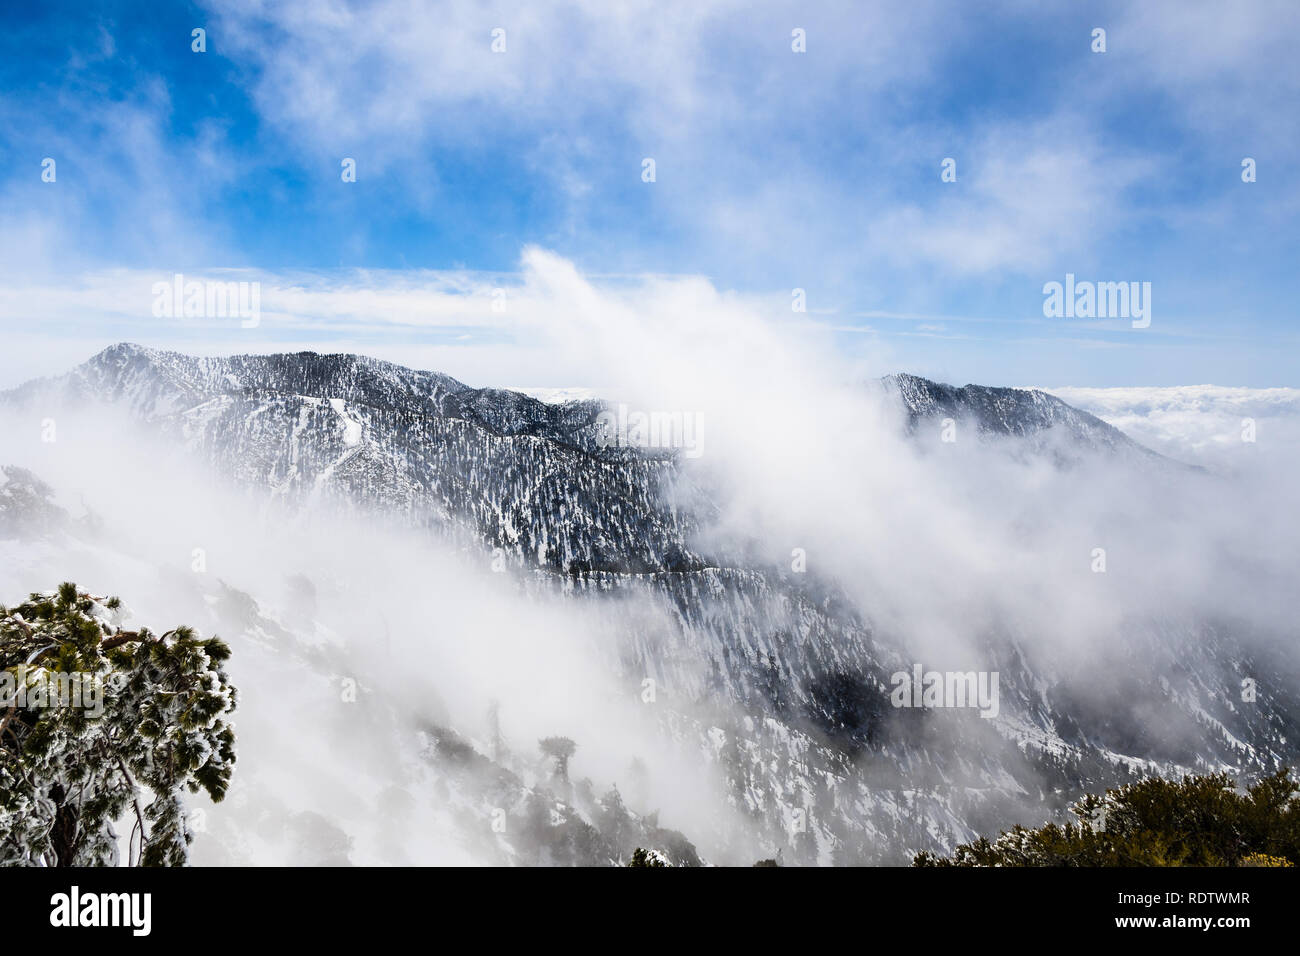 Changing weather with fog rising up from the valley, Mount San Antonio (Mt Baldy), south California Stock Photo